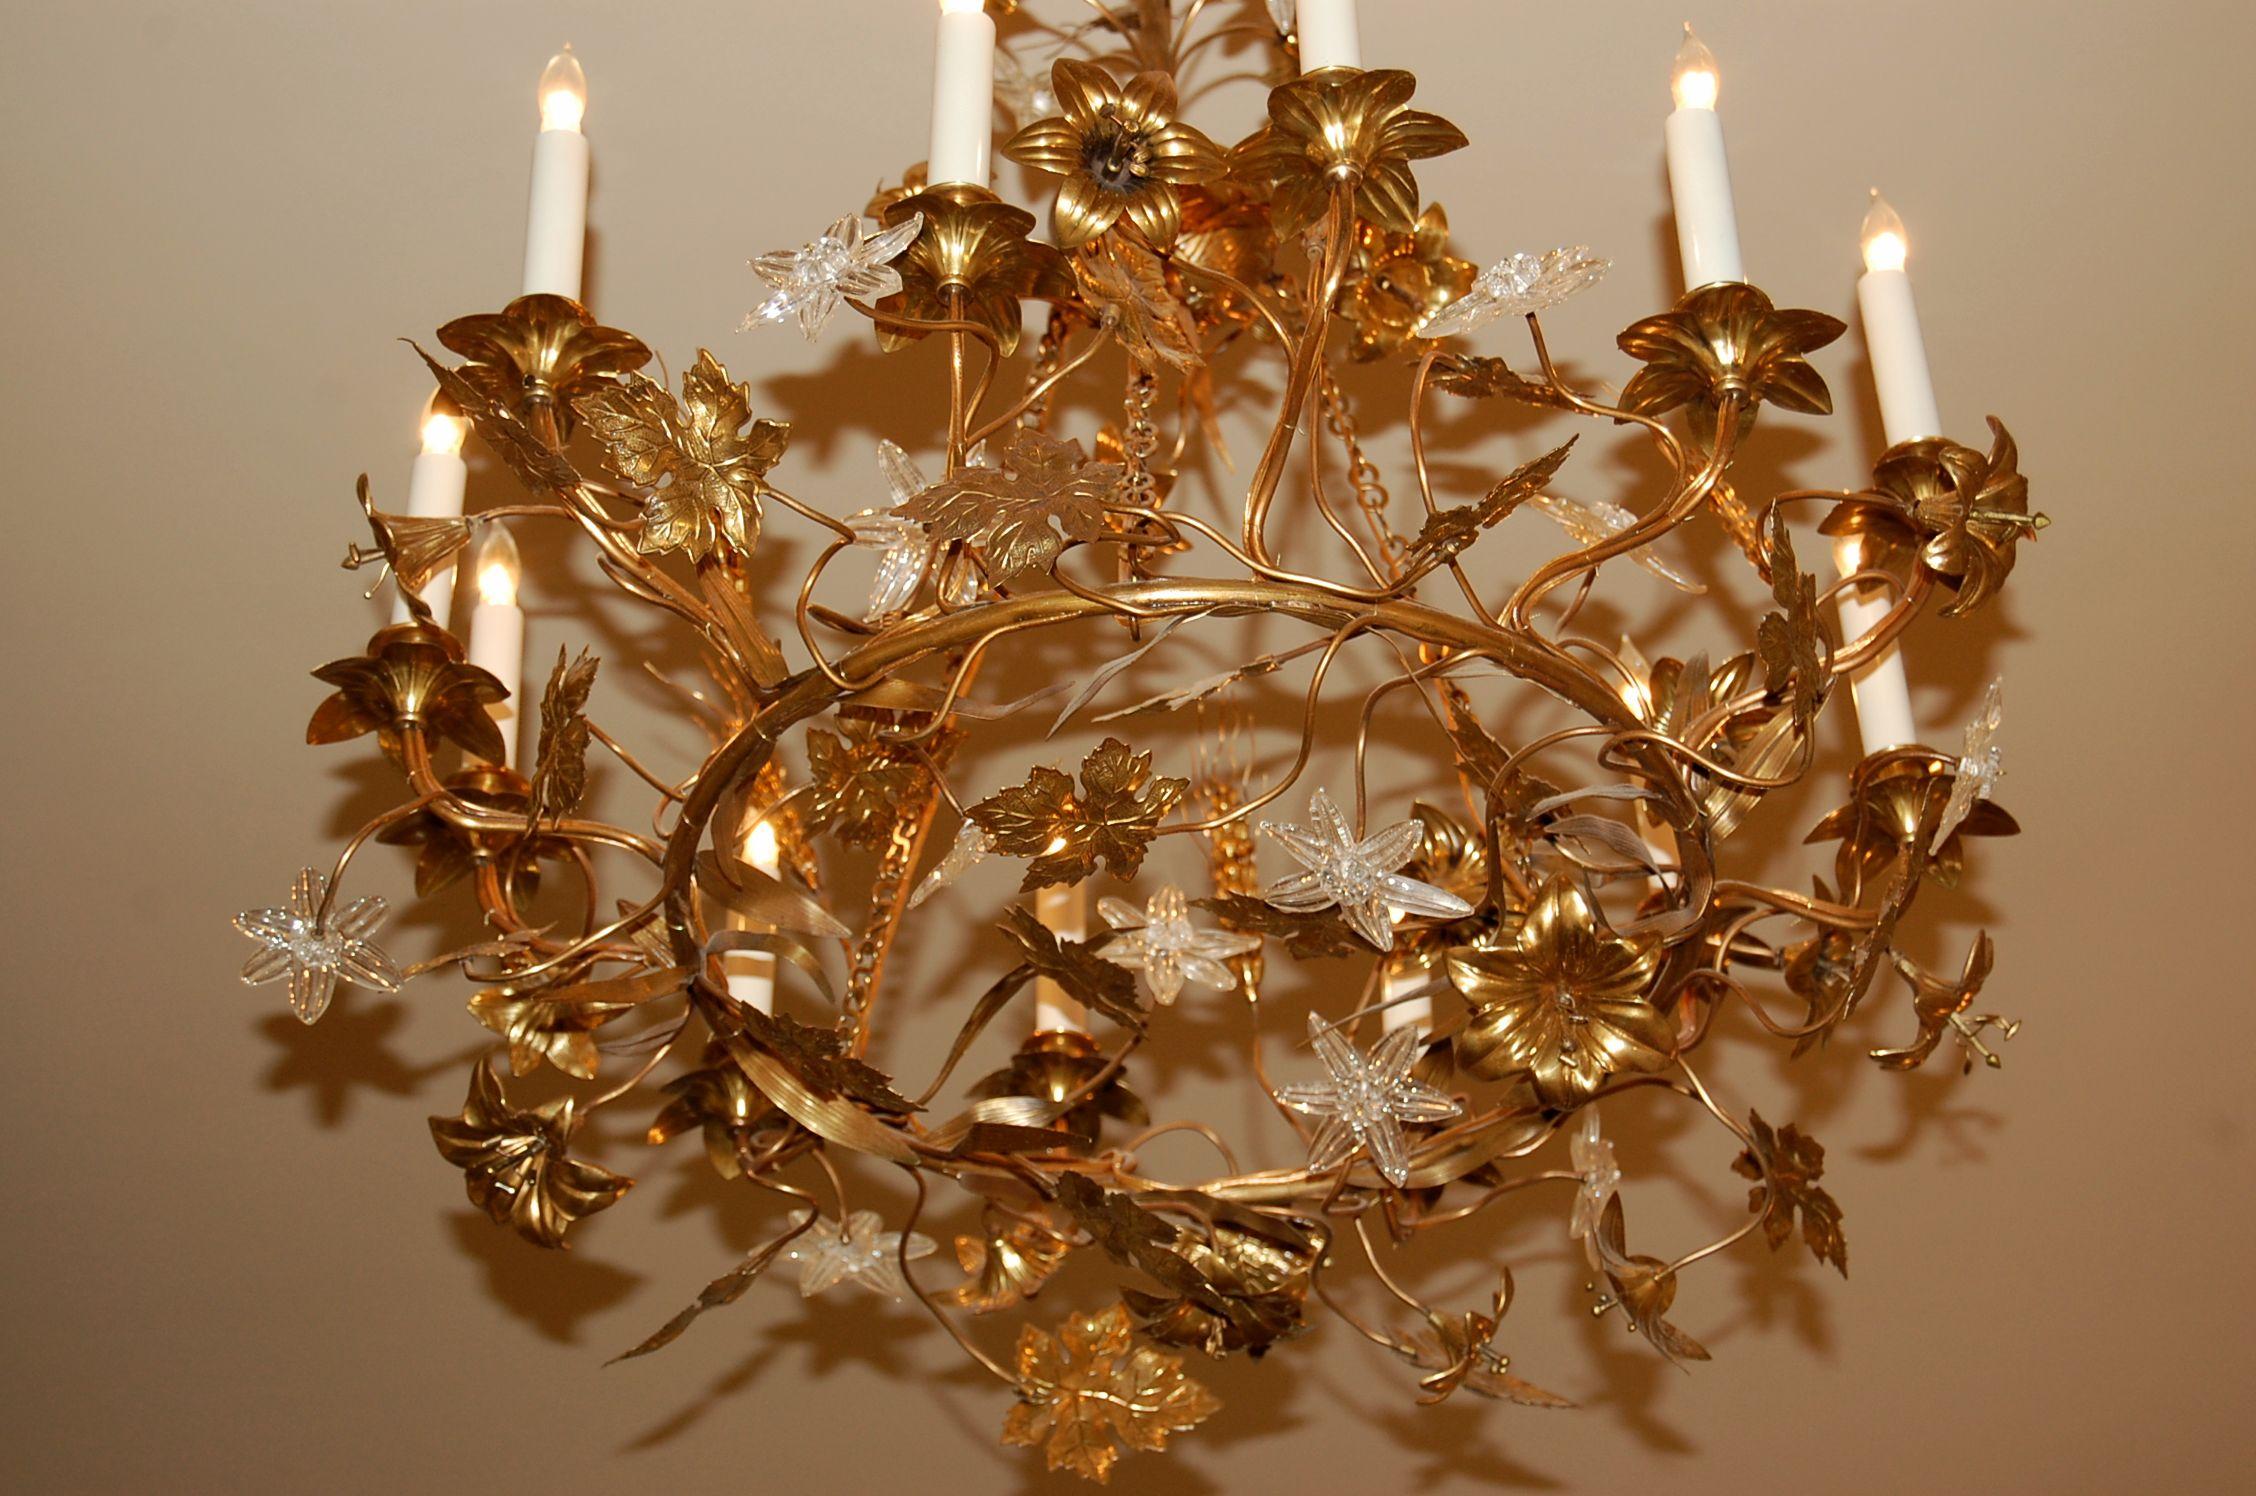 Gilt Brass Chandelier with Clusters of Brass Grapes, Leaves and Sheaths of Wheat 4